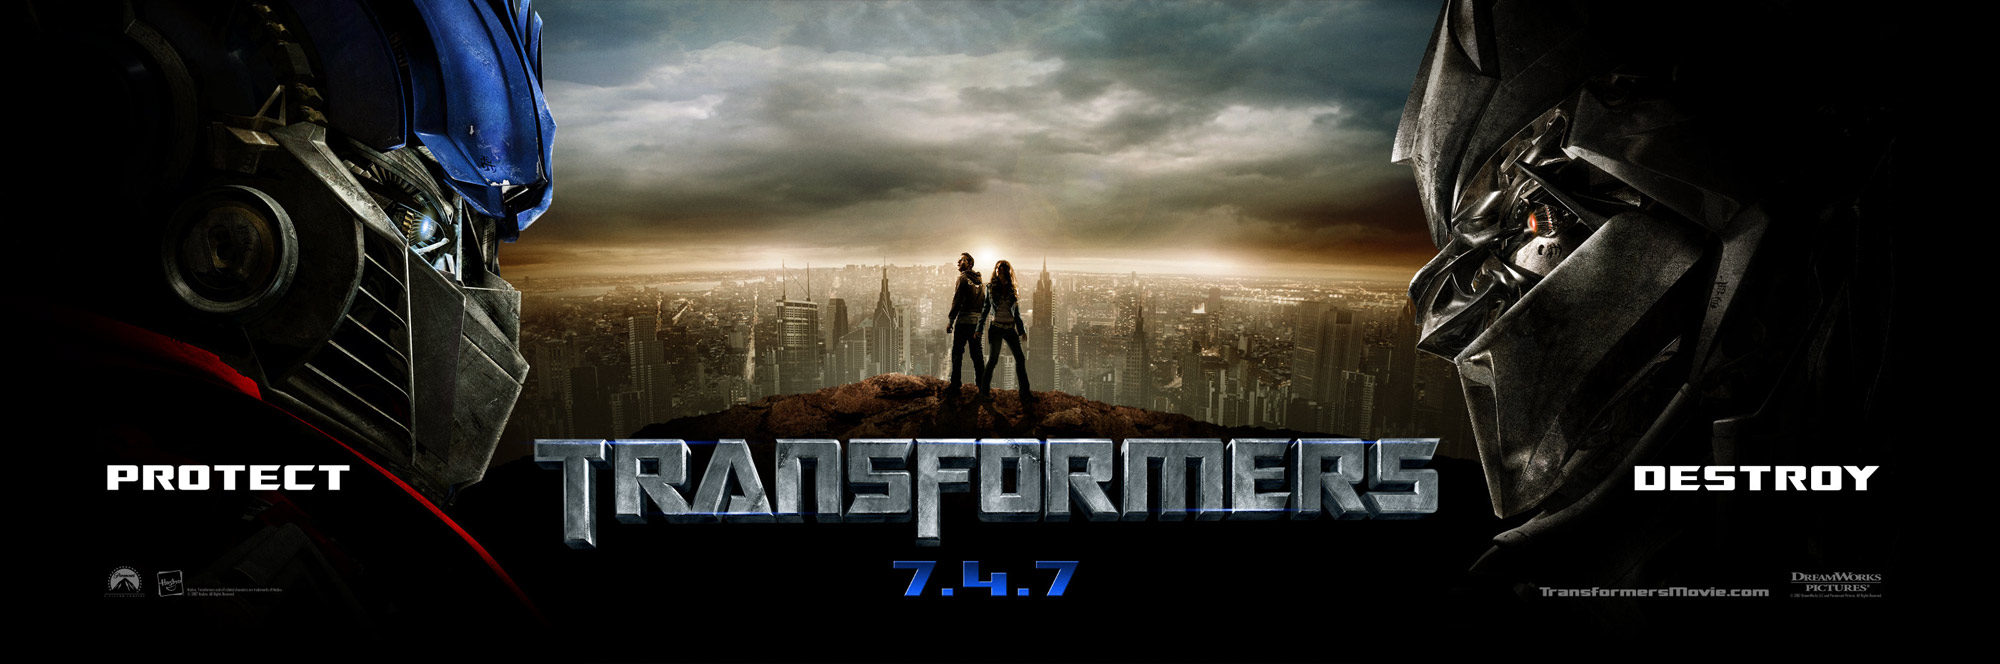 Transformers News: Paramount looks to expand Transformers film franchise with spin-offs and more sequels